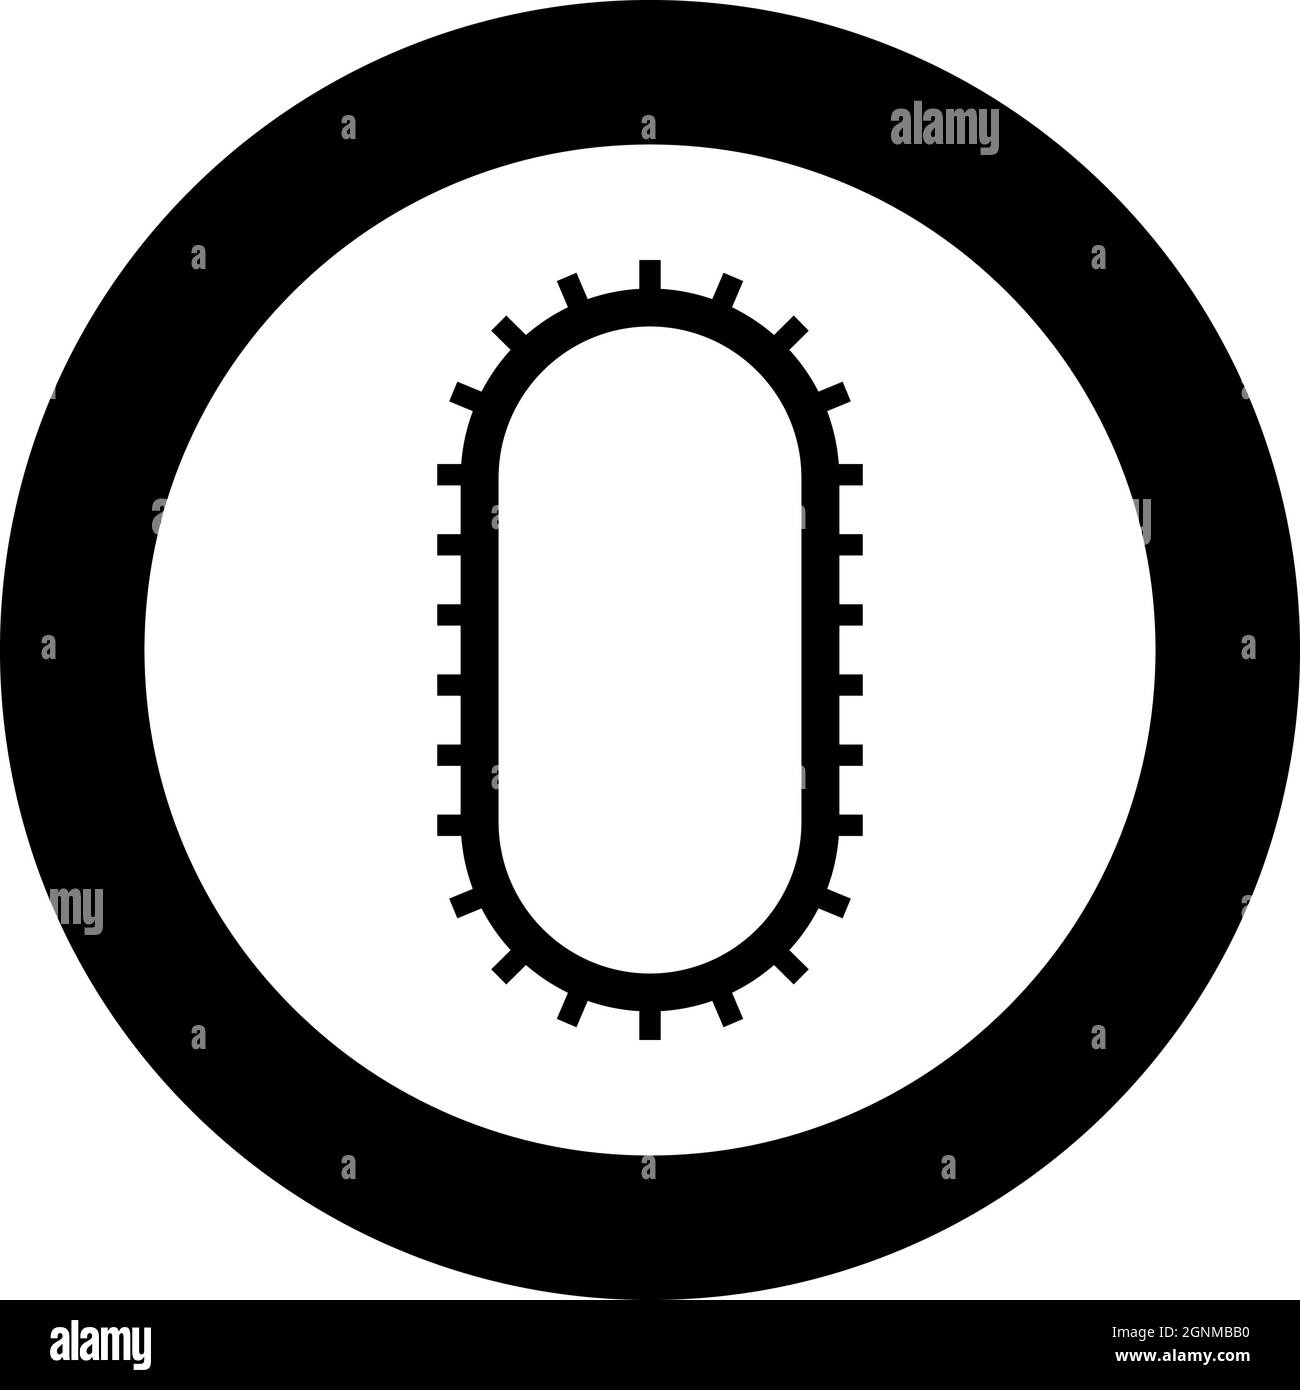 Strap for engine washing machine Cambelt Shootless belt icon in circle round black color vector illustration solid outline style simple image Stock Vector